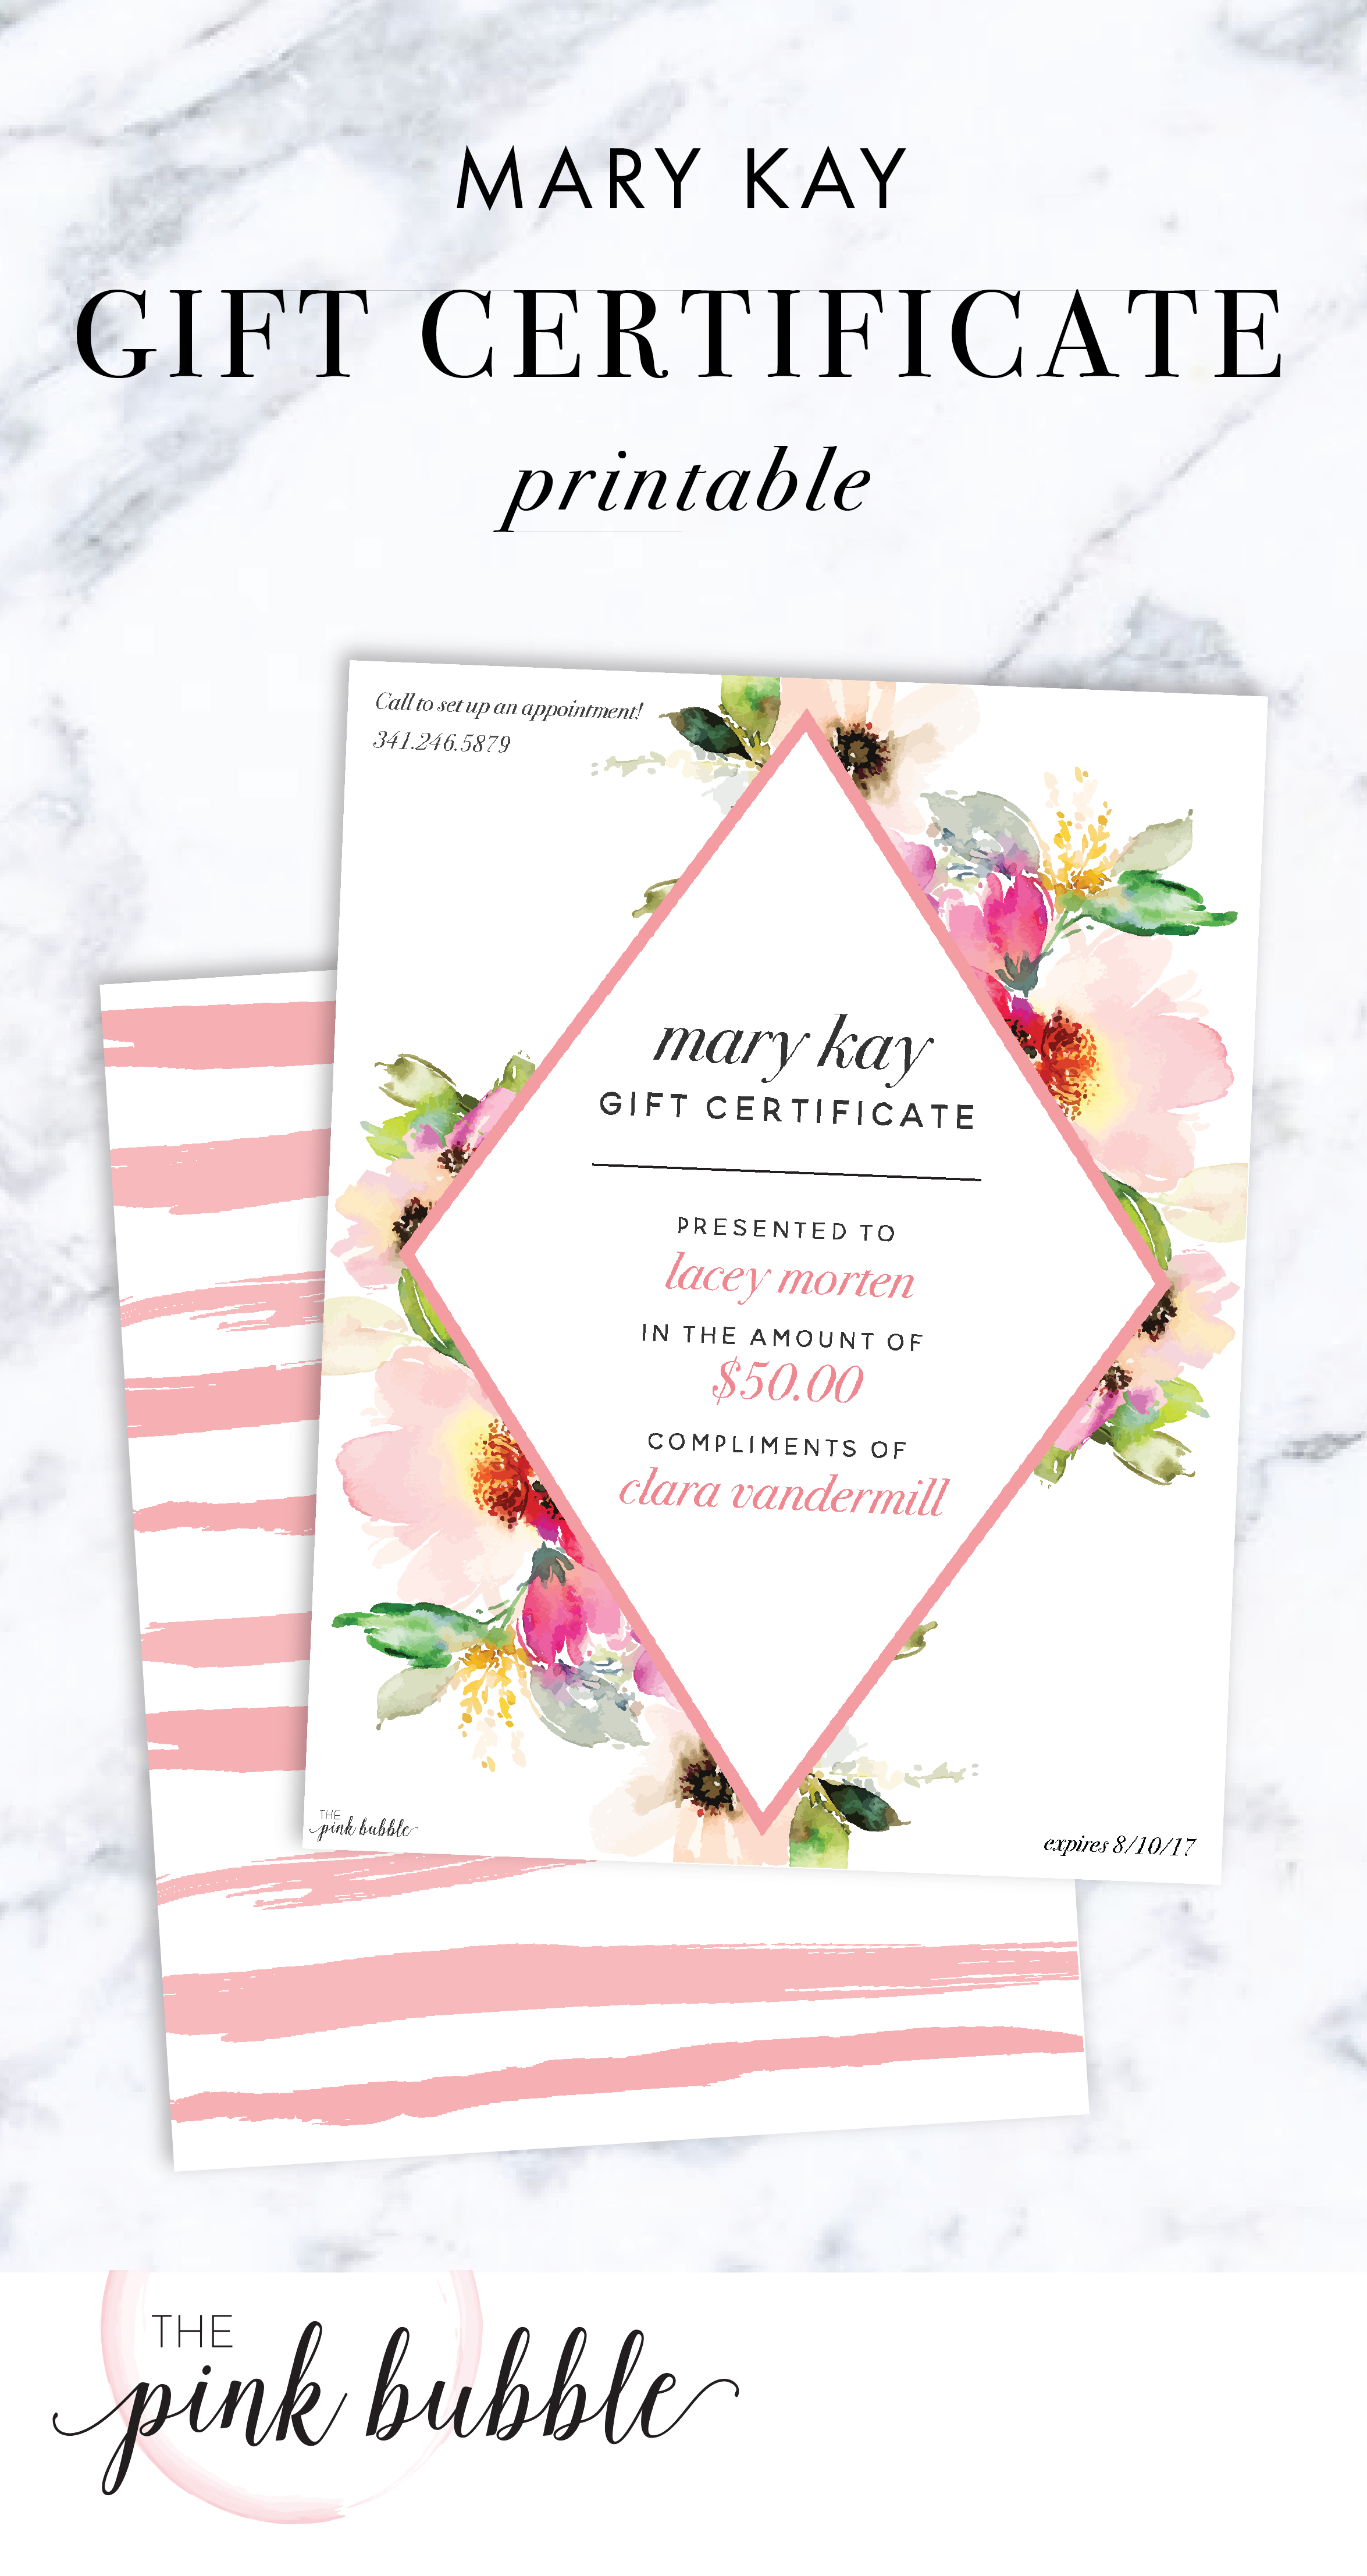 Mary Kay Gift Certificate! Find It Only At Www.thepinkbubble With Mary Kay Gift Certificate Template